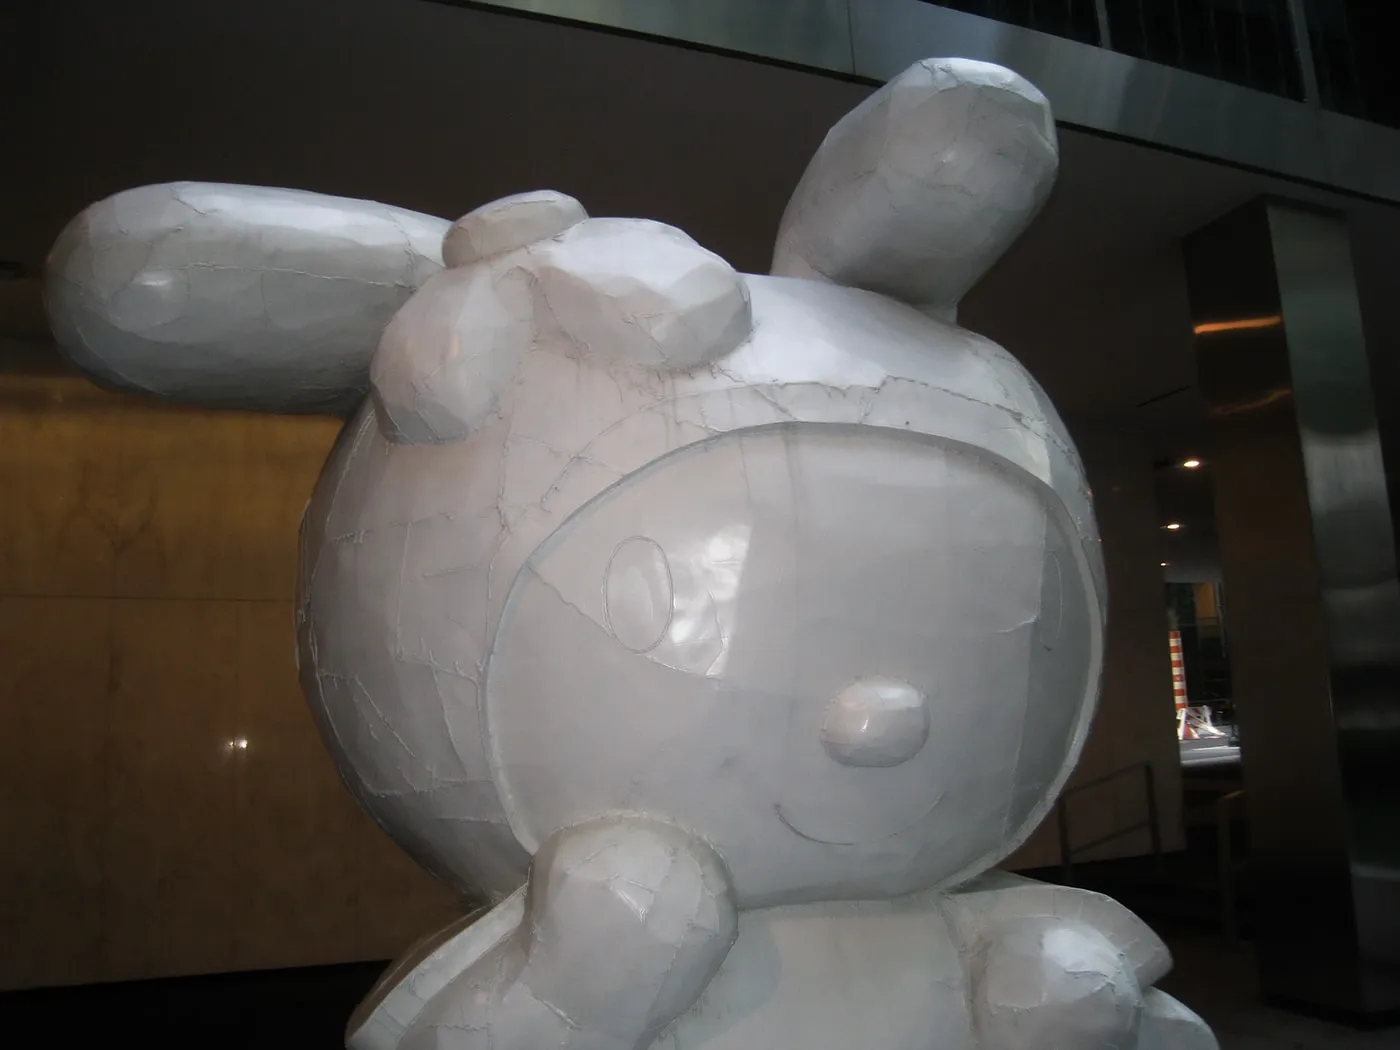 My Melody Hello Kitty Statues at the Lever House Art Collection in New York City.